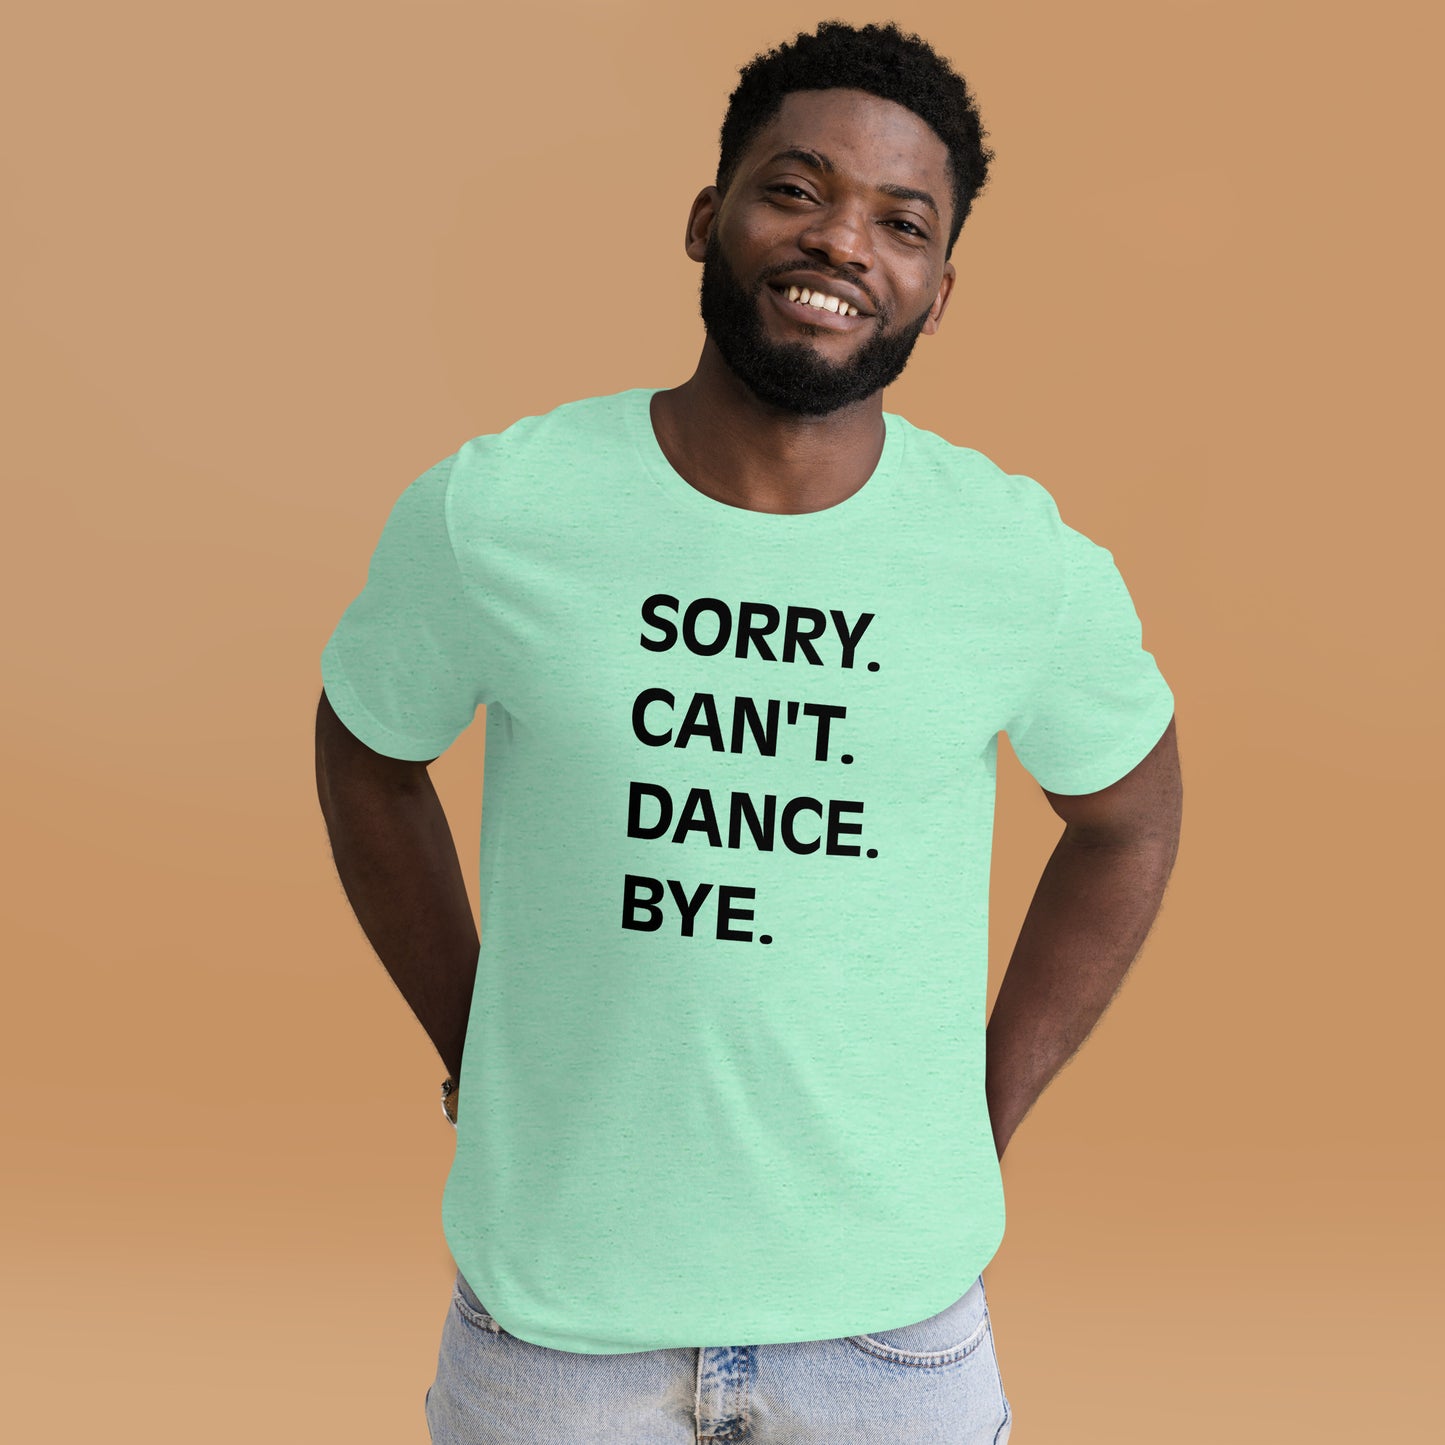 Adult "Sorry. Can't. Dance. Bye" Unisex t-shirt